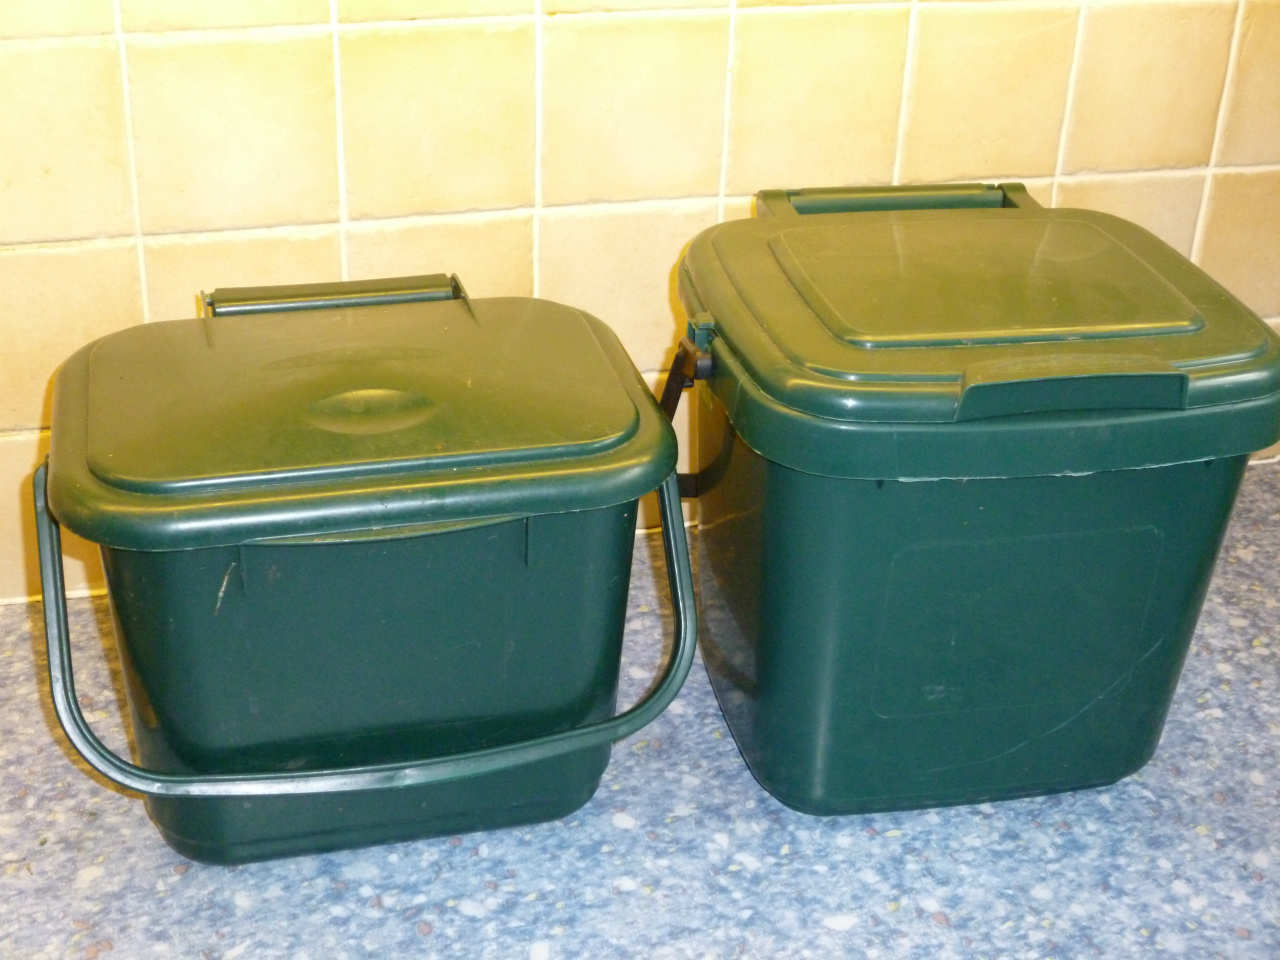 Addis Eco 100% Recycled Plastic Everyday Kitchen Food Waste Compost Caddy Bin, 